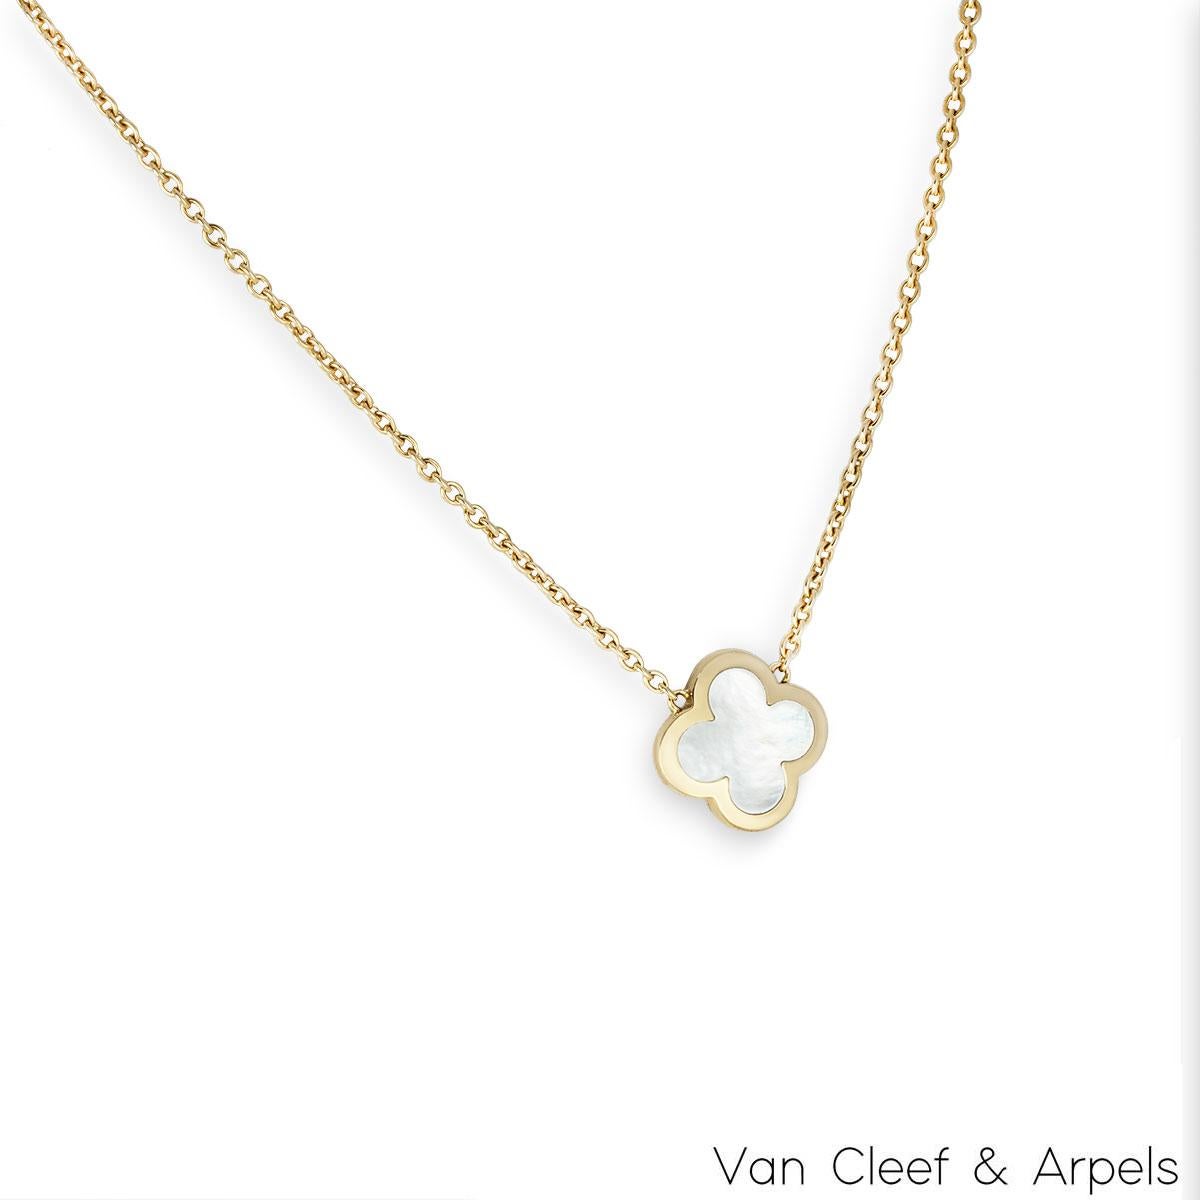 An 18k yellow gold pendant from the Pure Alhambra collection by Van Cleef & Arpels. The pendant features a four leaf clover motif with a mother of pearl inlay and a polished outer edge. The pendant measures 1.5cm in width and comes on an original